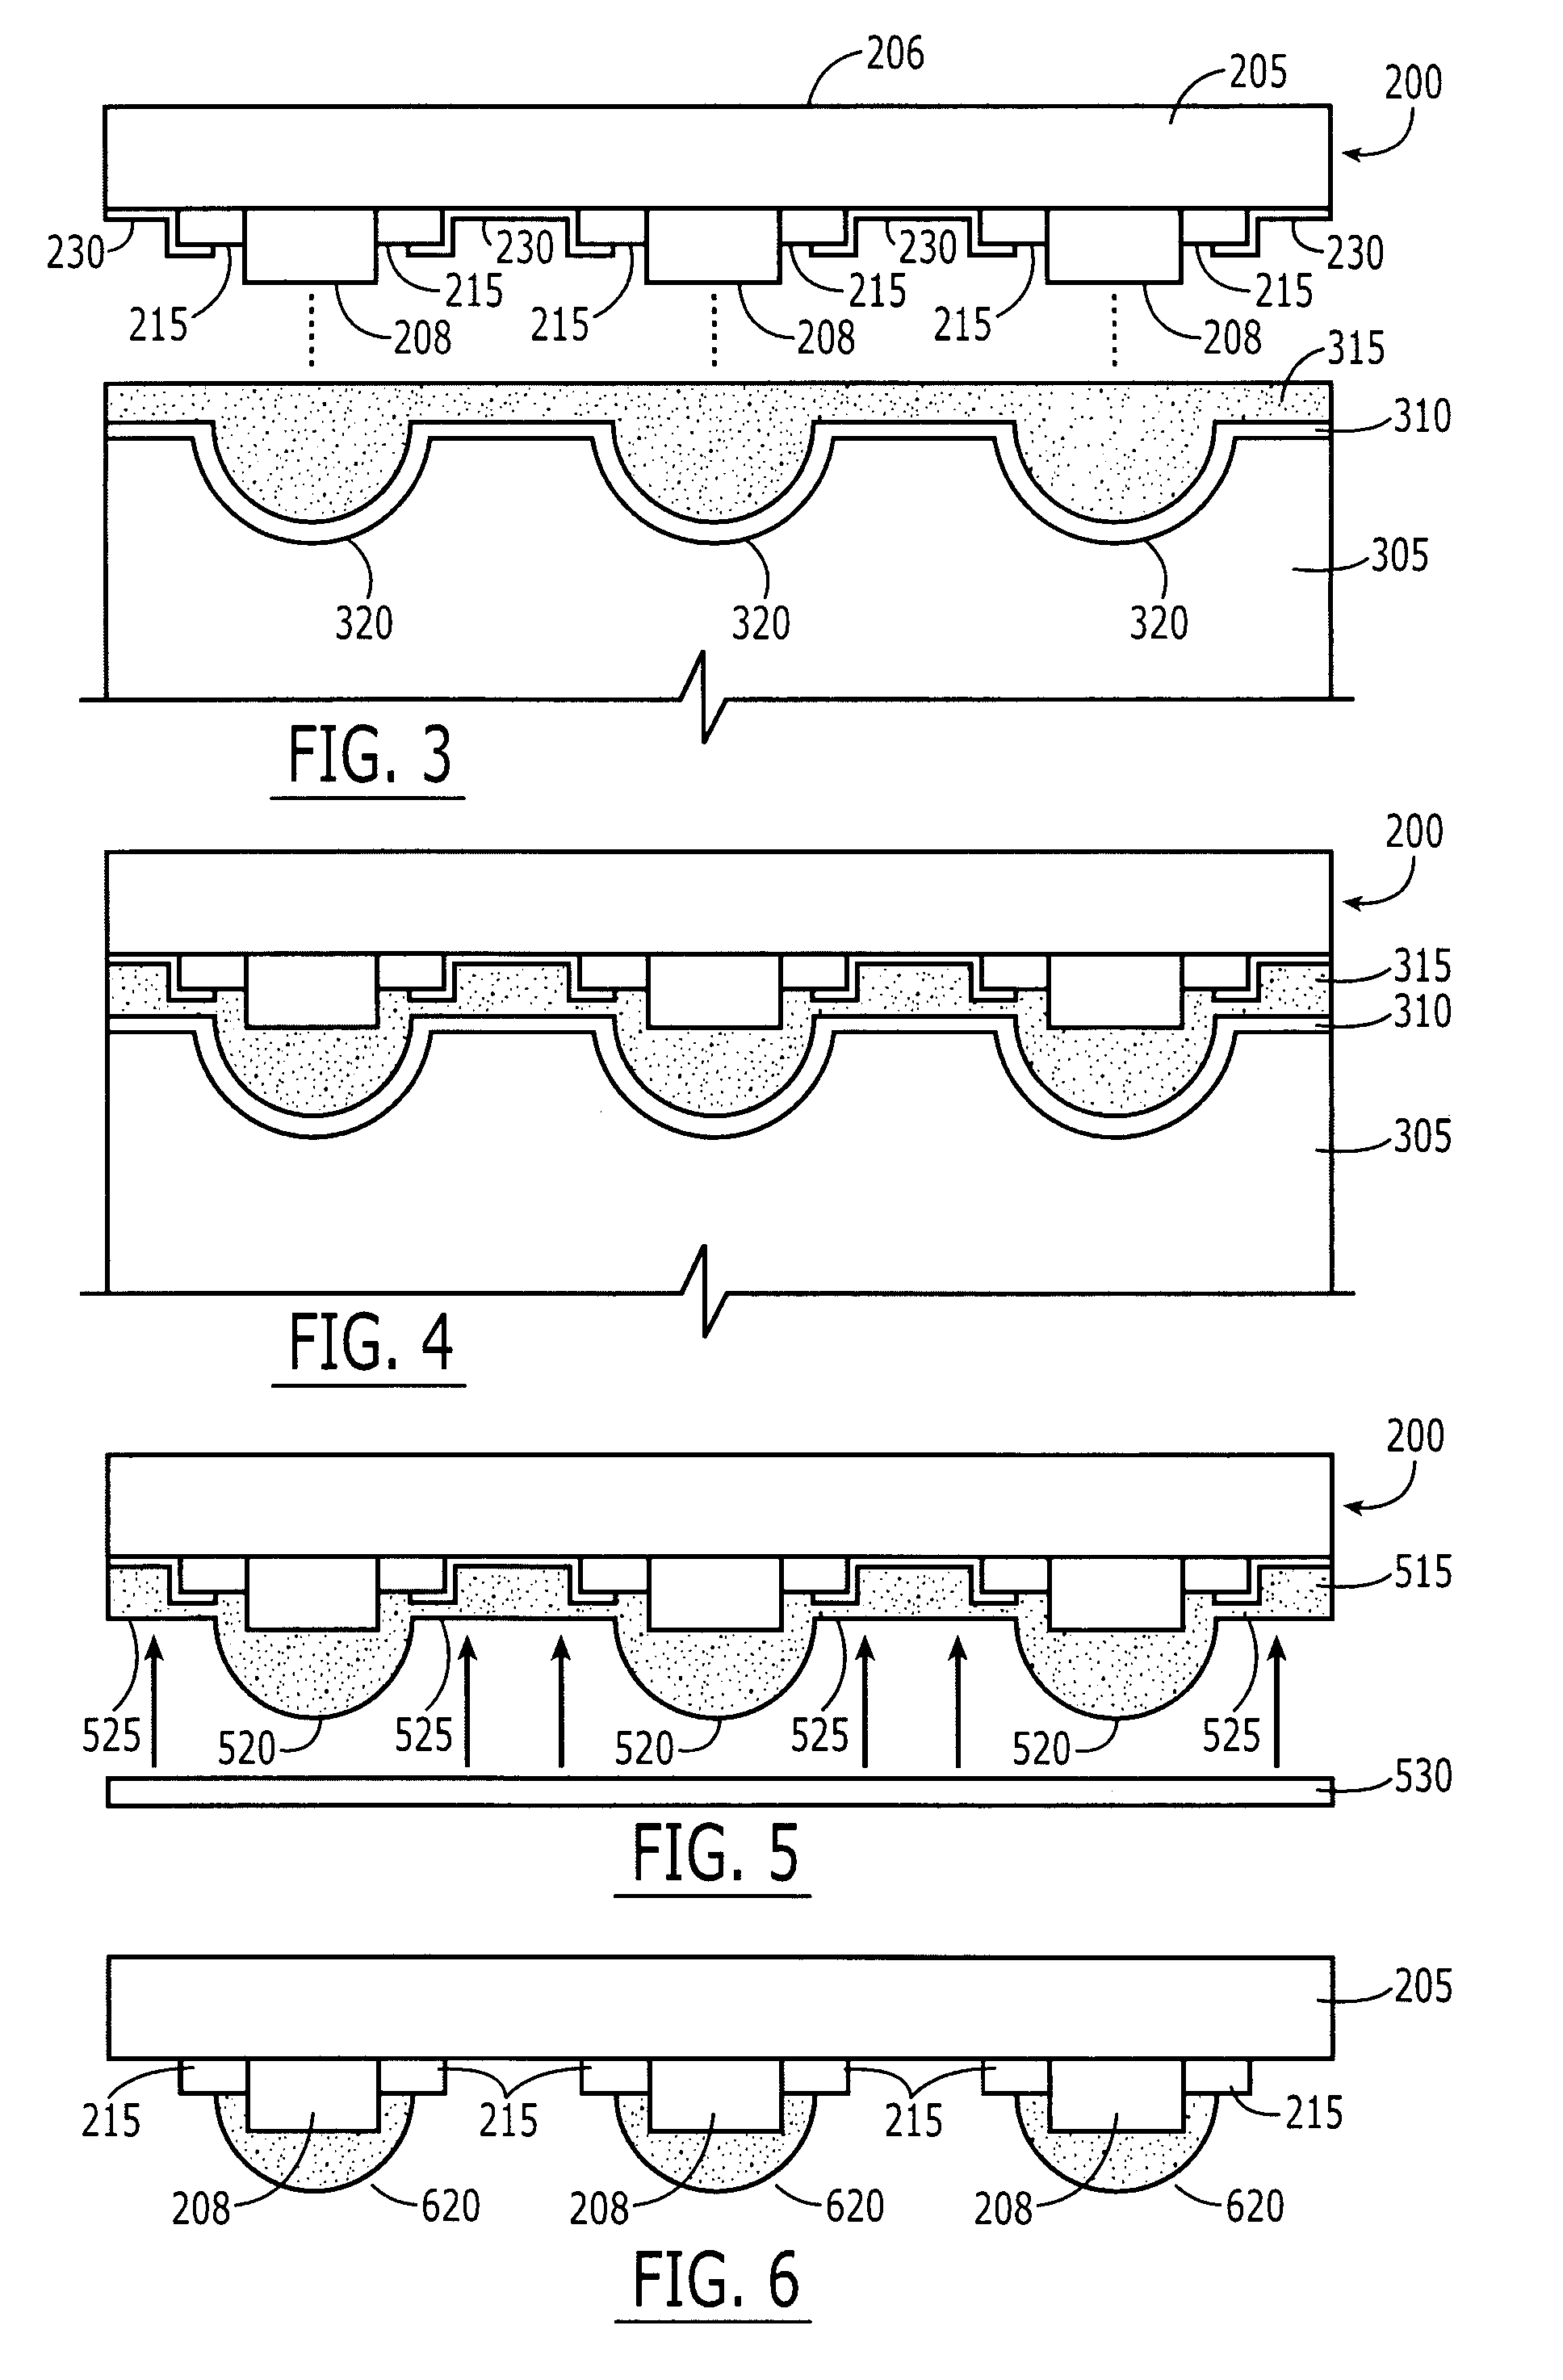 Packaged semiconductor light emitting devices having multiple optical elements